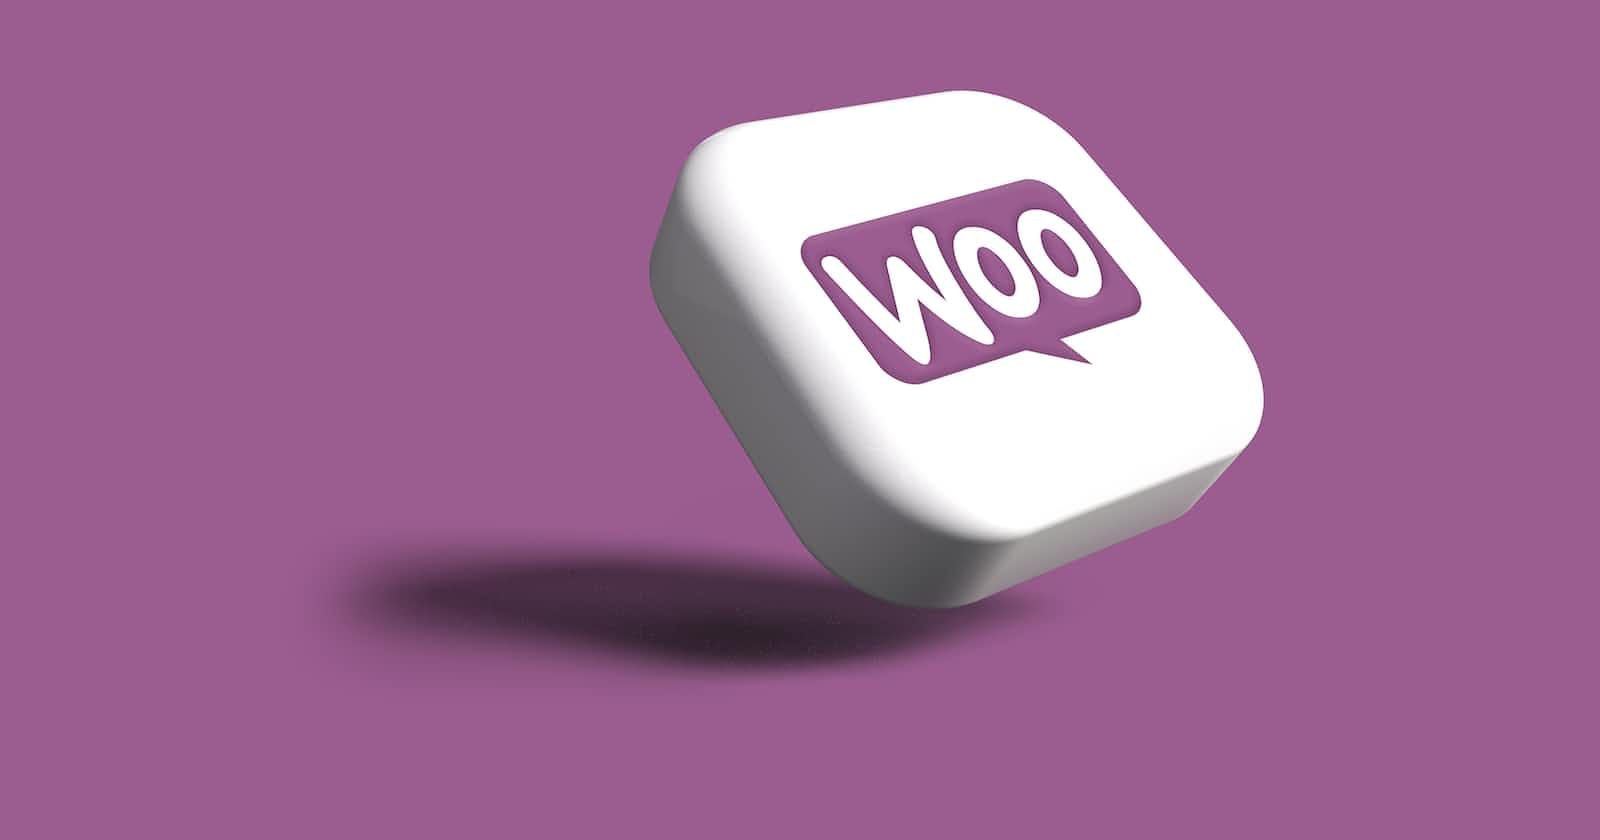 WordPress eCommerce with WooCommerce: A Guide to Setting Up and Running an Online Store using the Popular WooCommerce Plugin